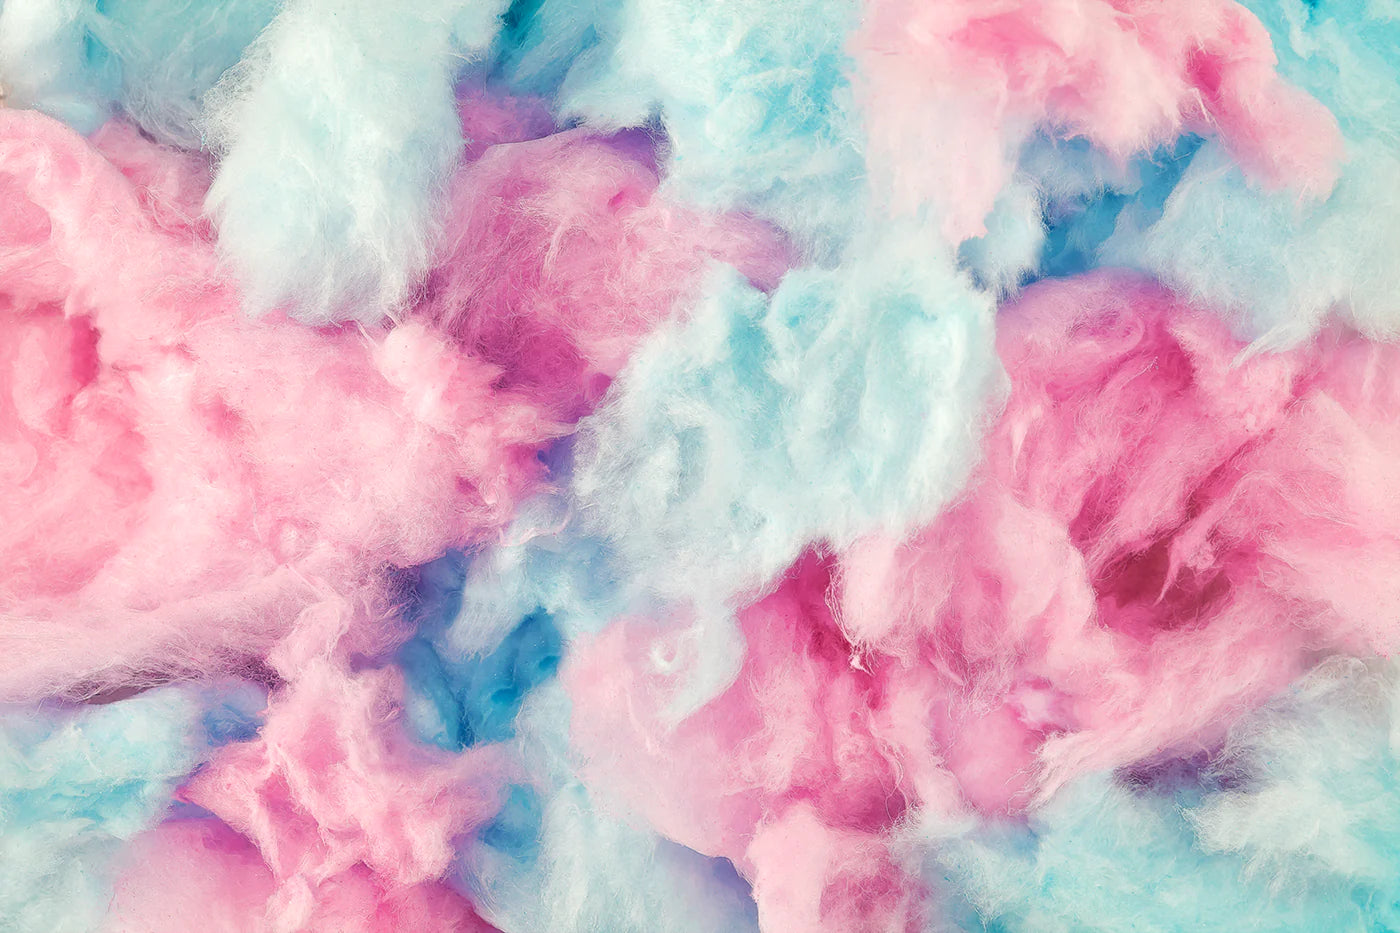 Flossie Cotton Candy